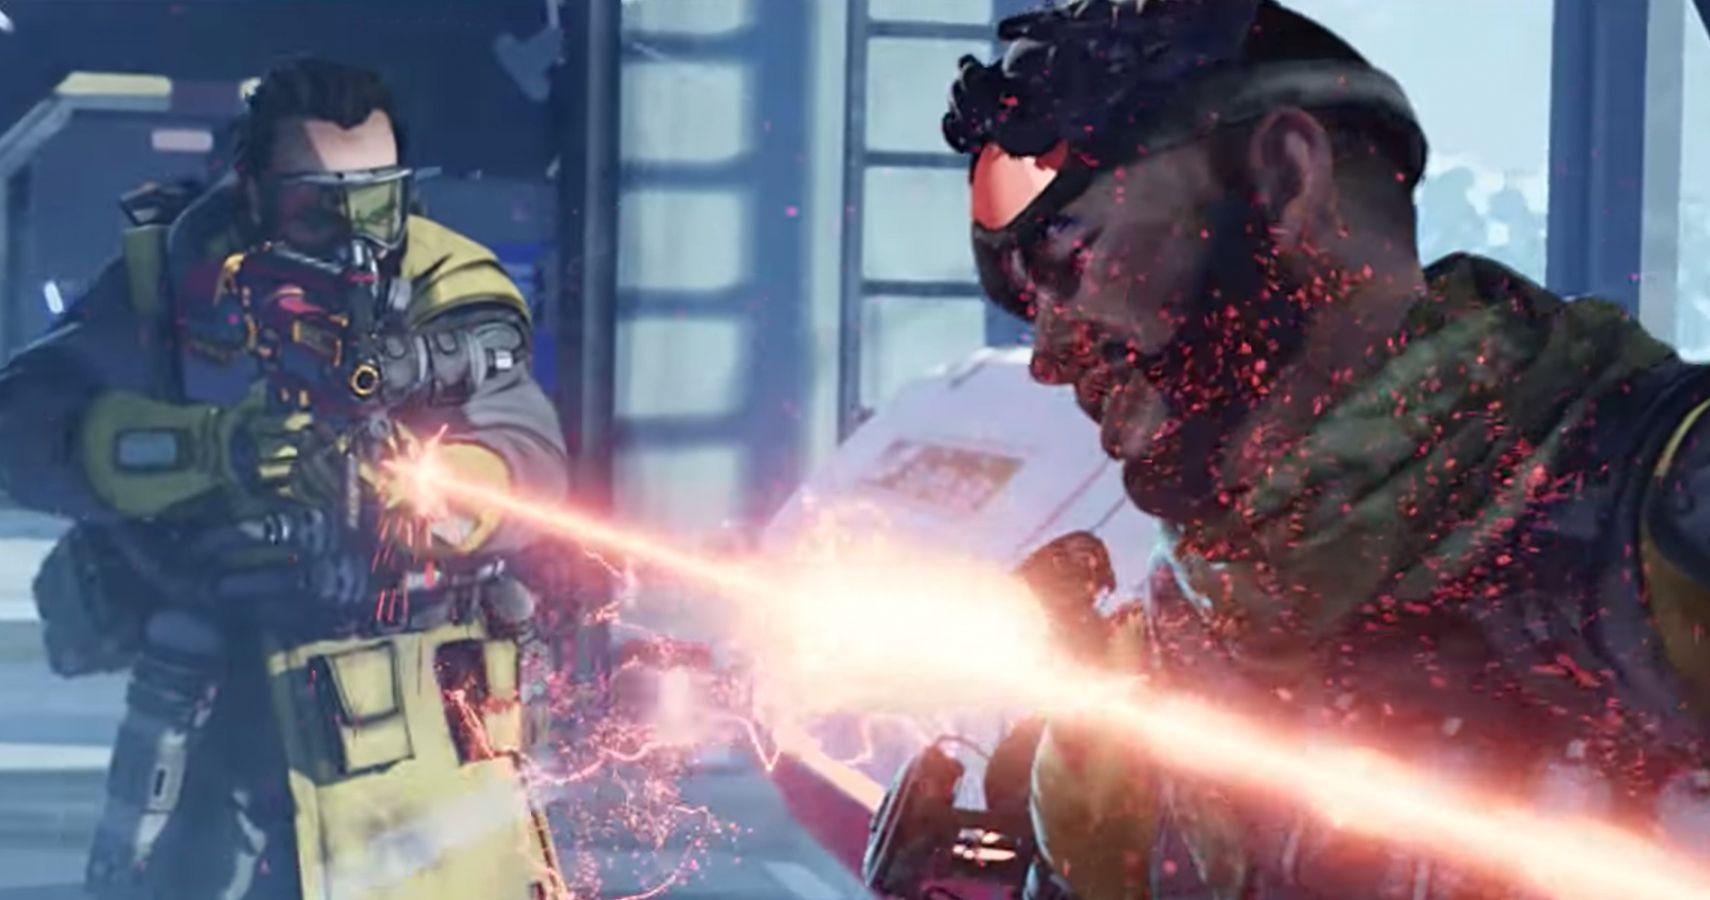 Caustic gets shot by rifle that narrowly avoids Mirage in the Apex Legends Season 3 trailer.